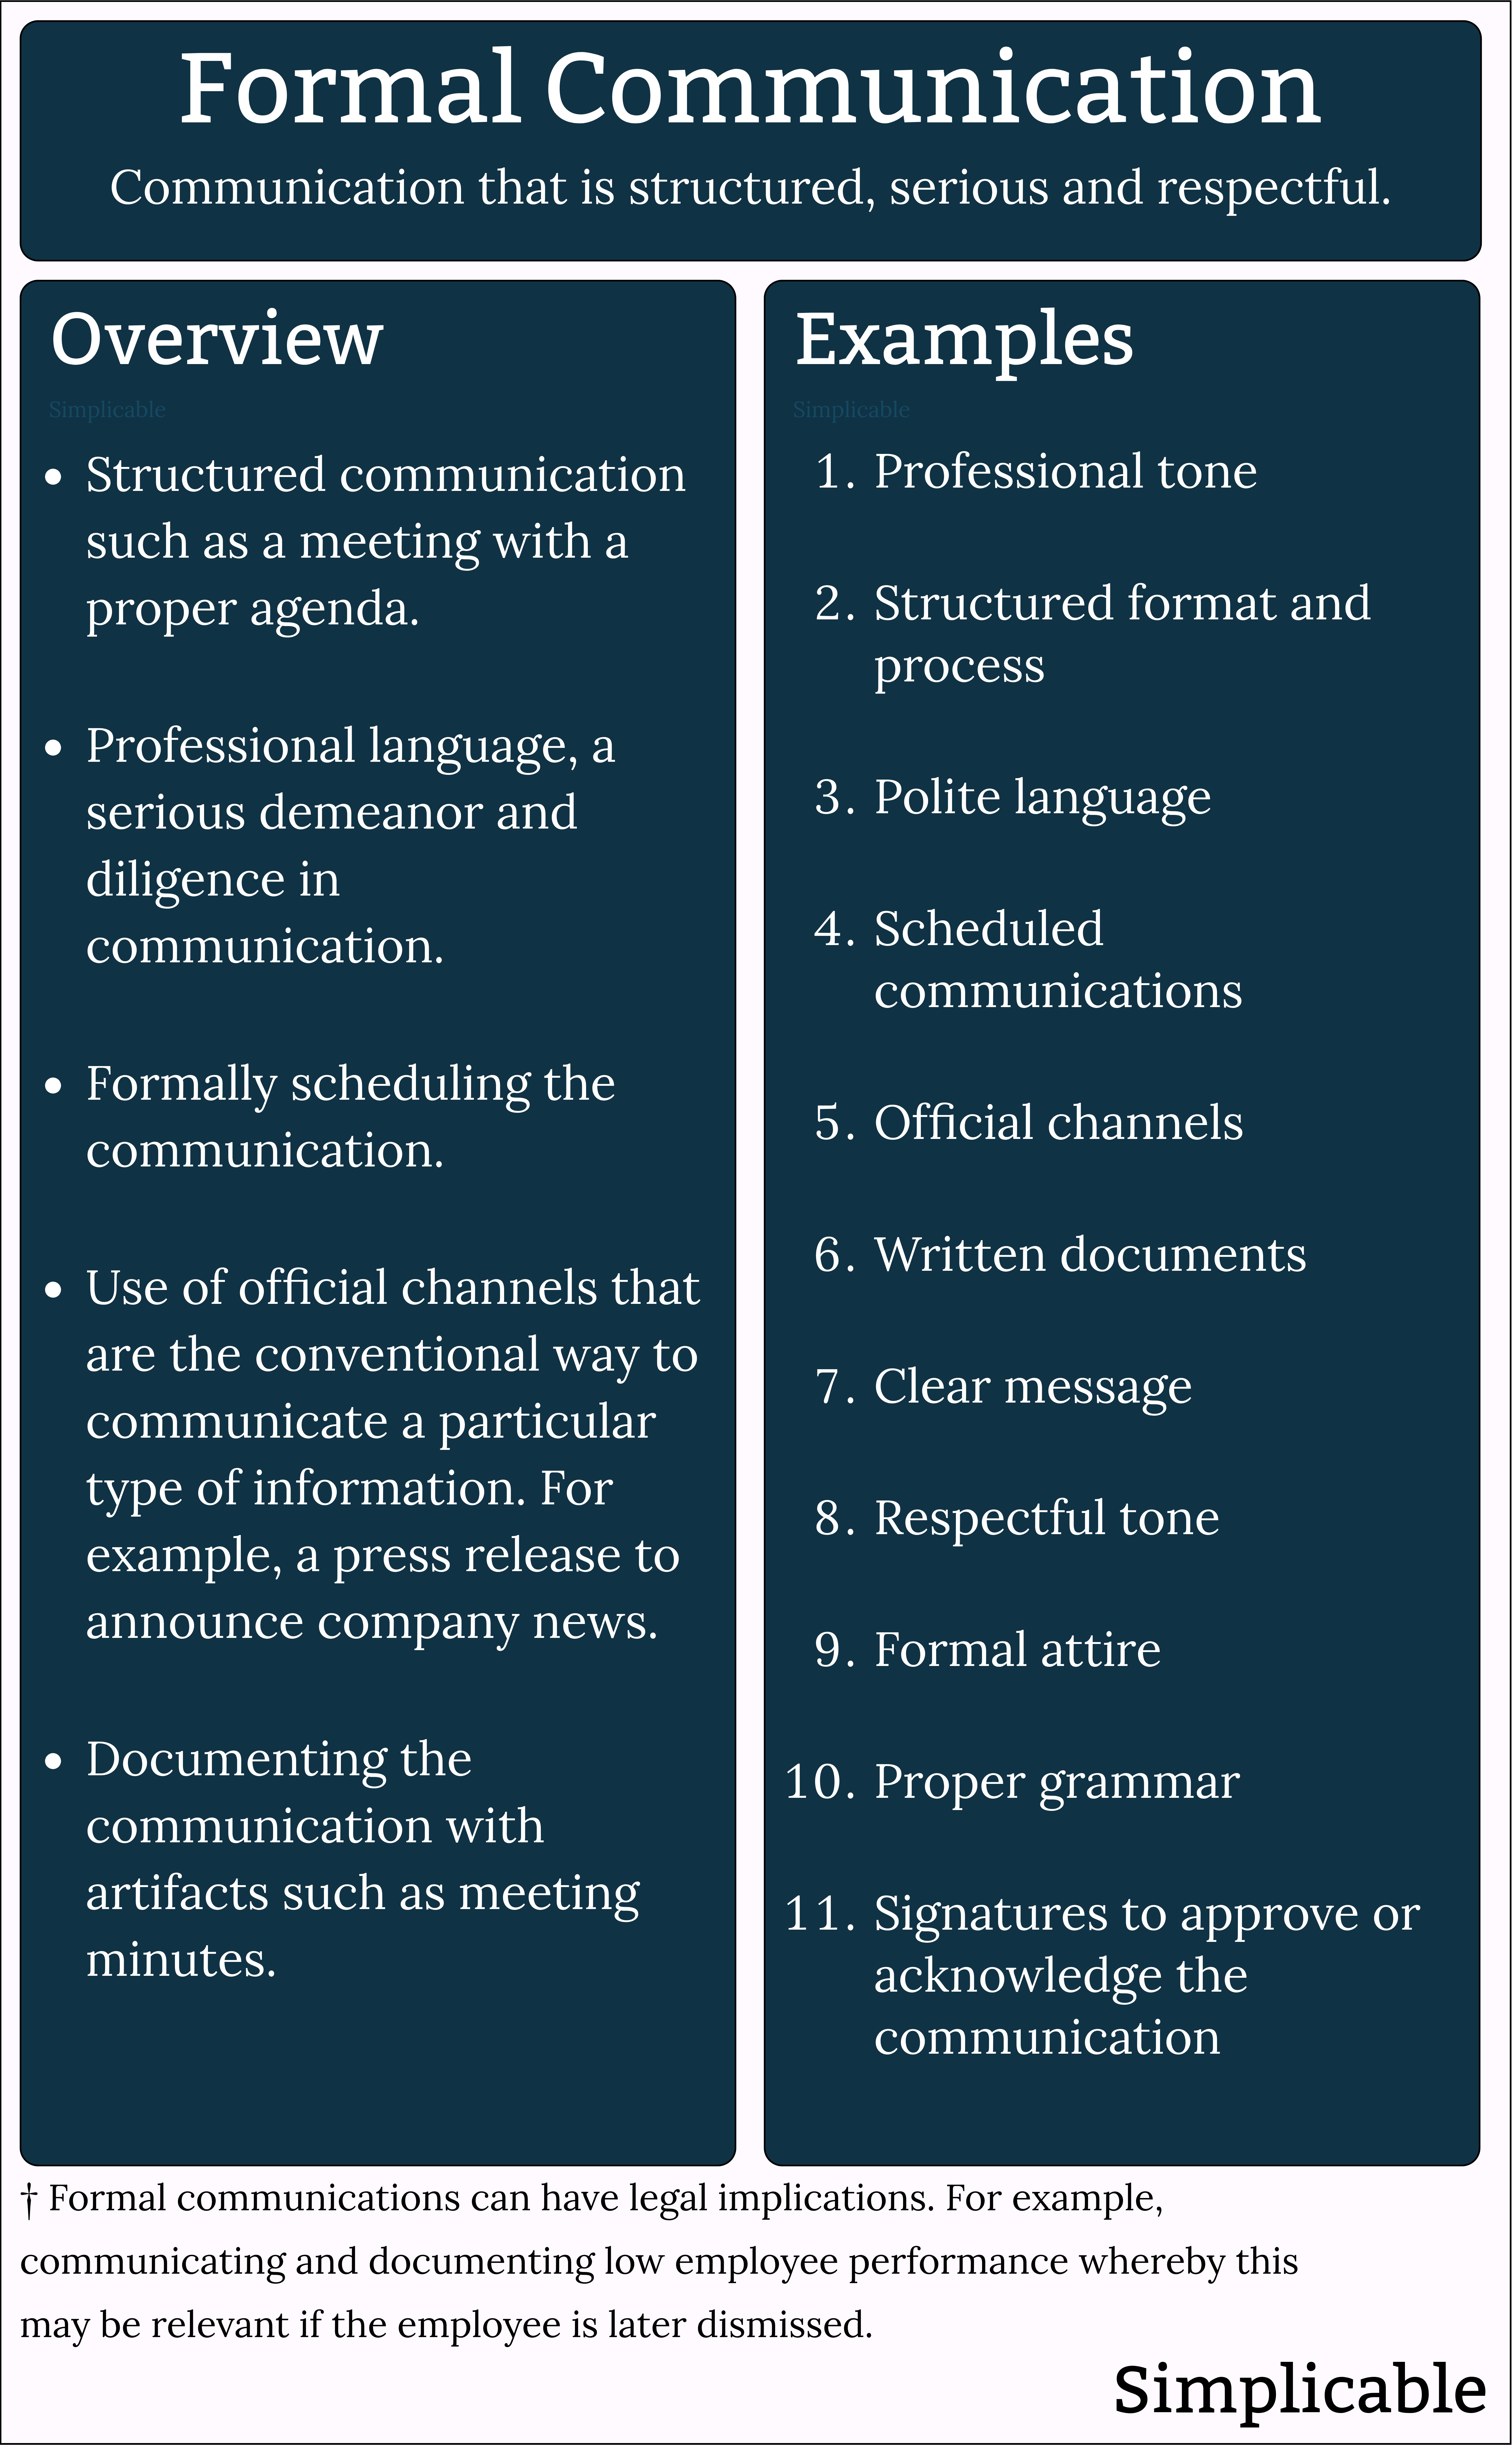 formal communication overview and examples